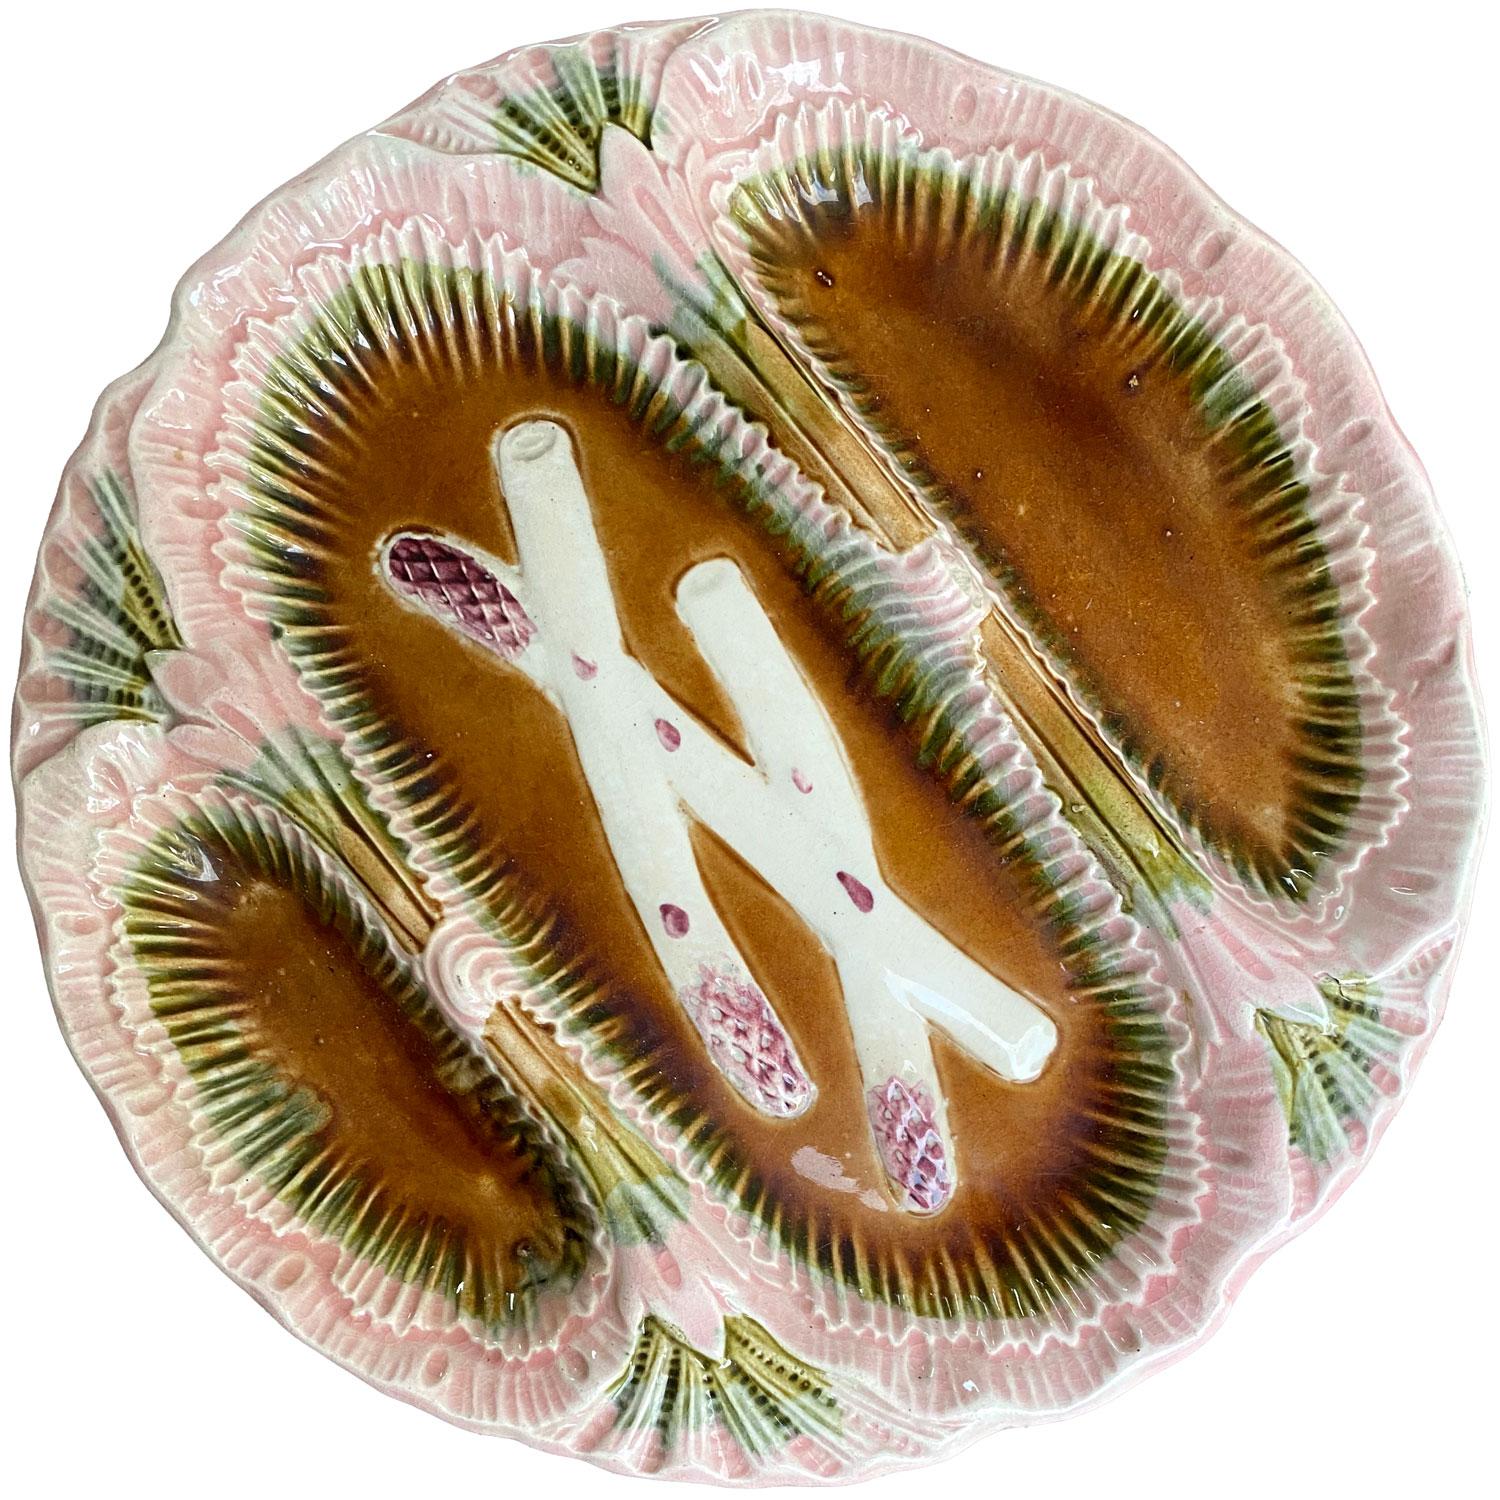 This 19th century Majolica asparagus hand-painted plate was made in France. Asparagus plate in pink and brown with three distinct compartments and decorated in the Louis XV style. Marked 23 on the Back. Work of the faïencerie d'Orchies.

The